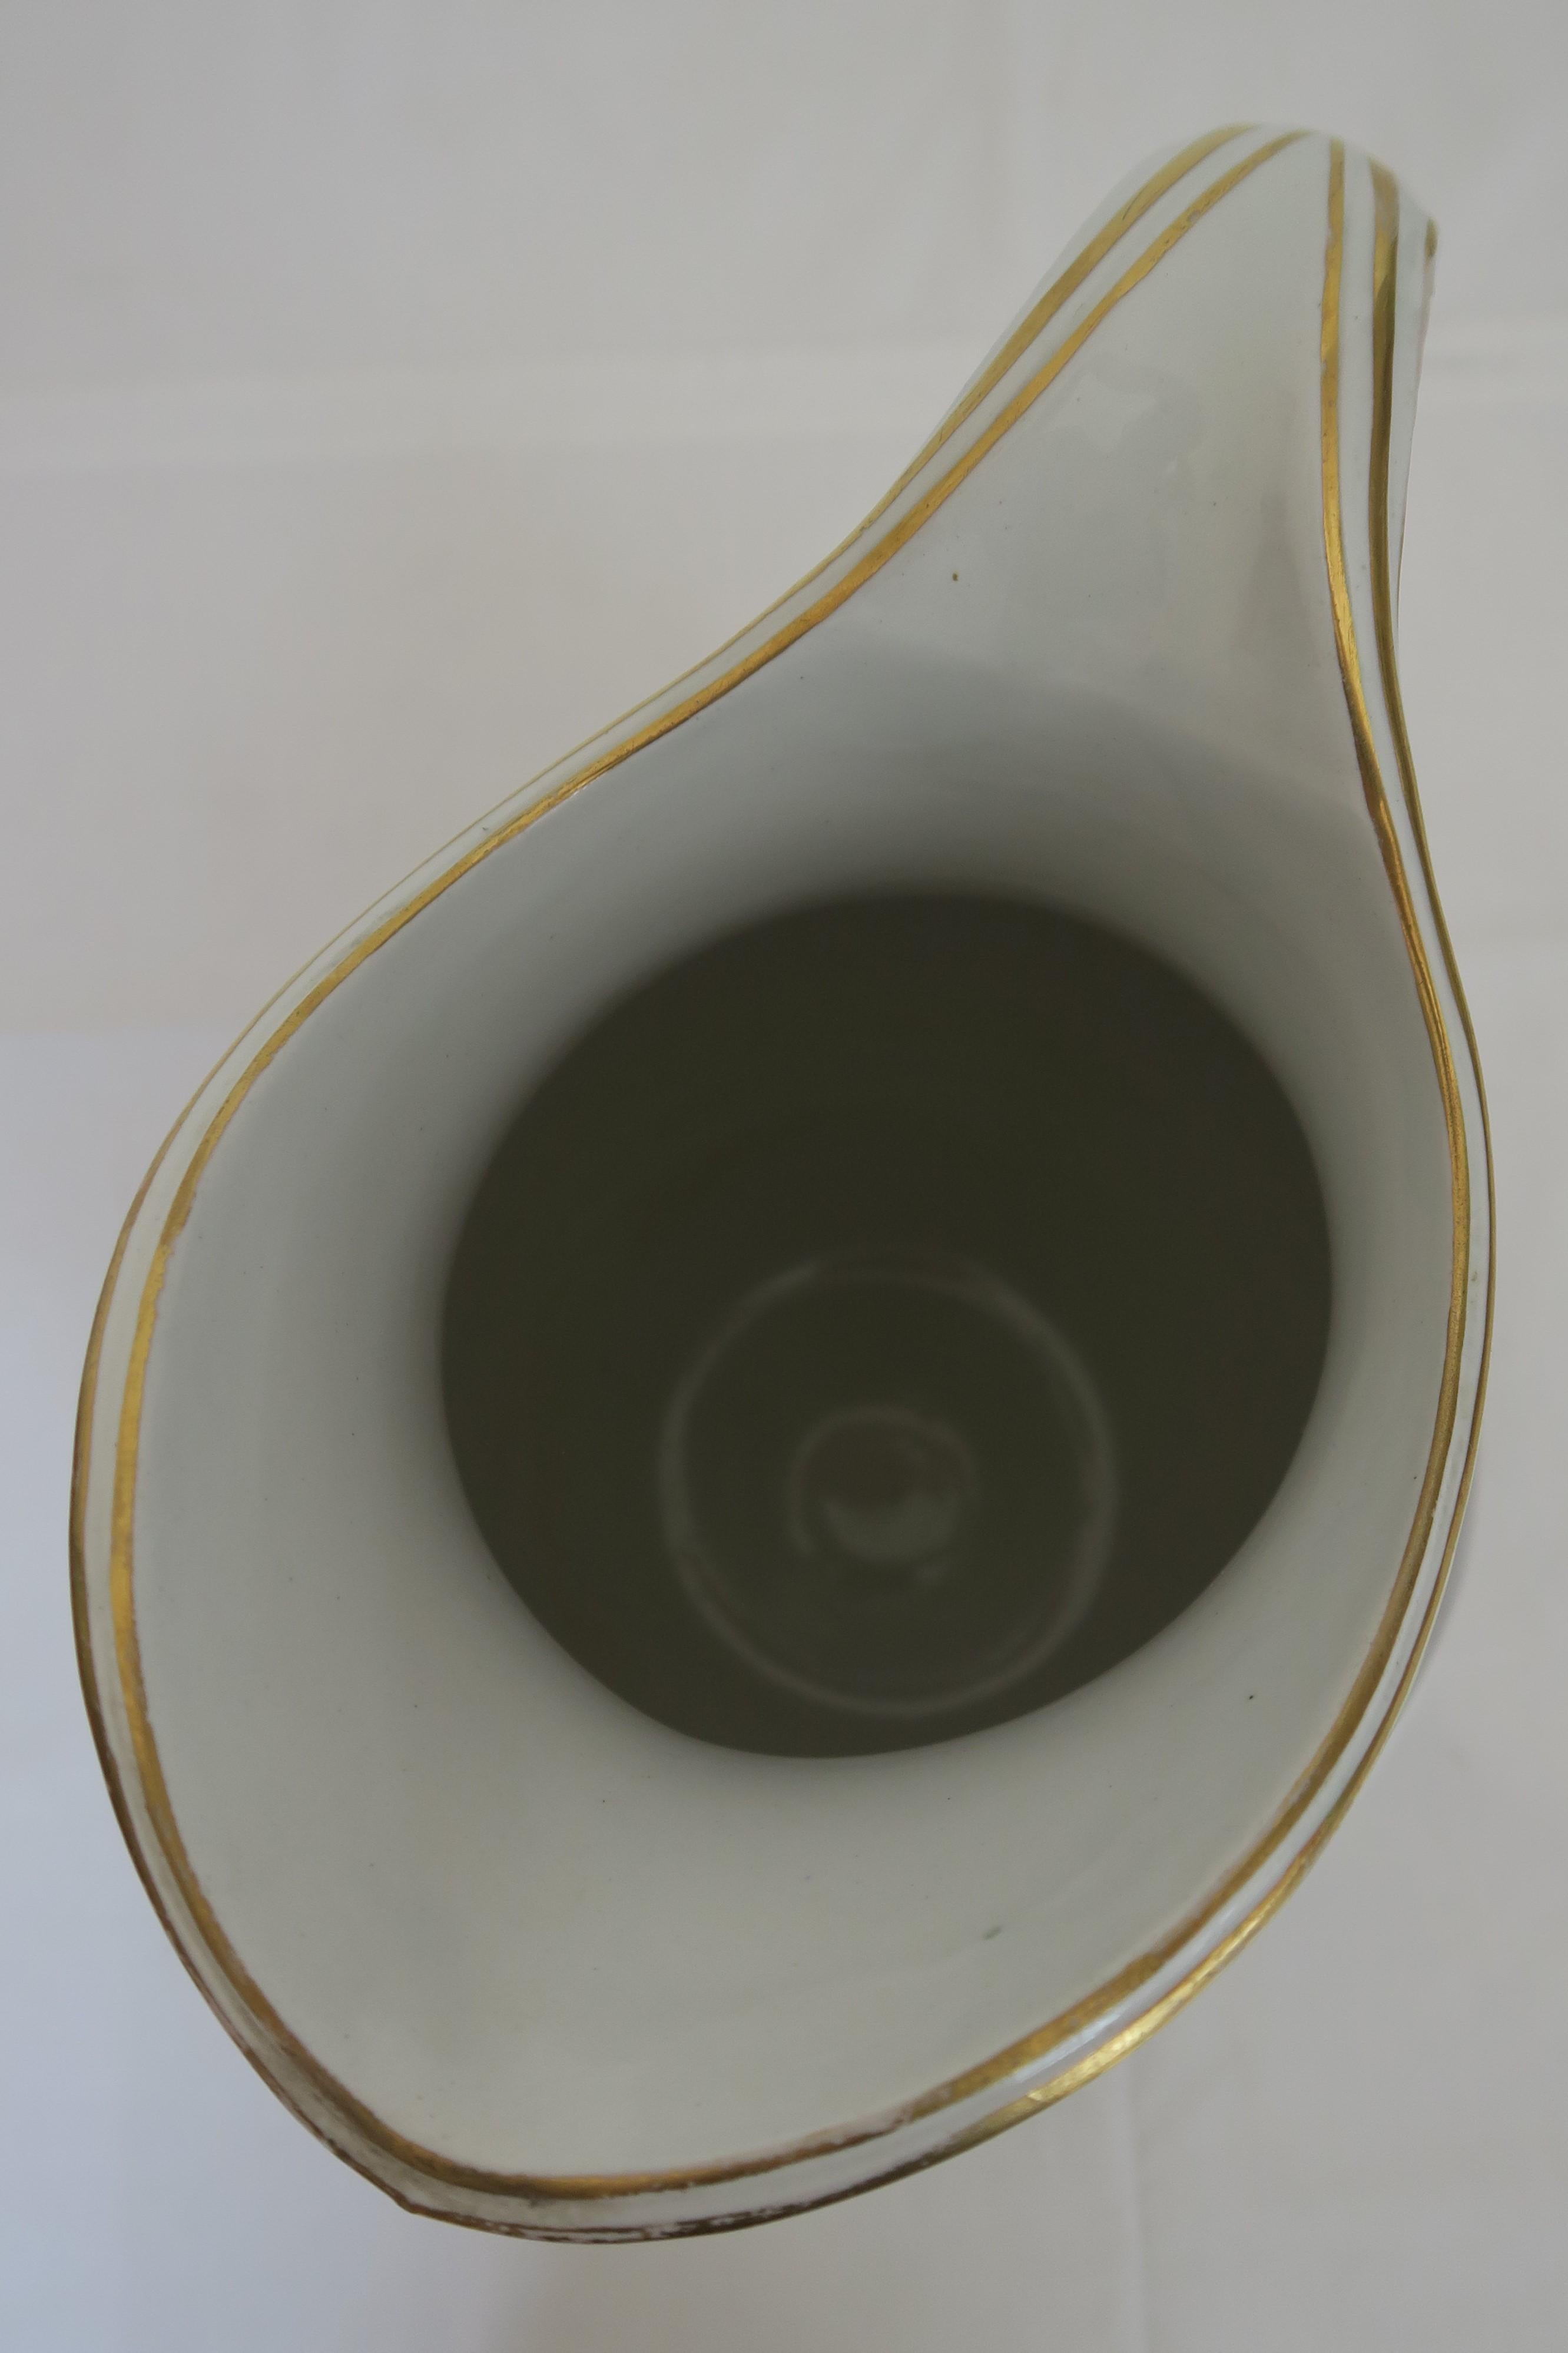 Hand-Crafted 1880 Minton Porcelain Pitcher with Feather Motif